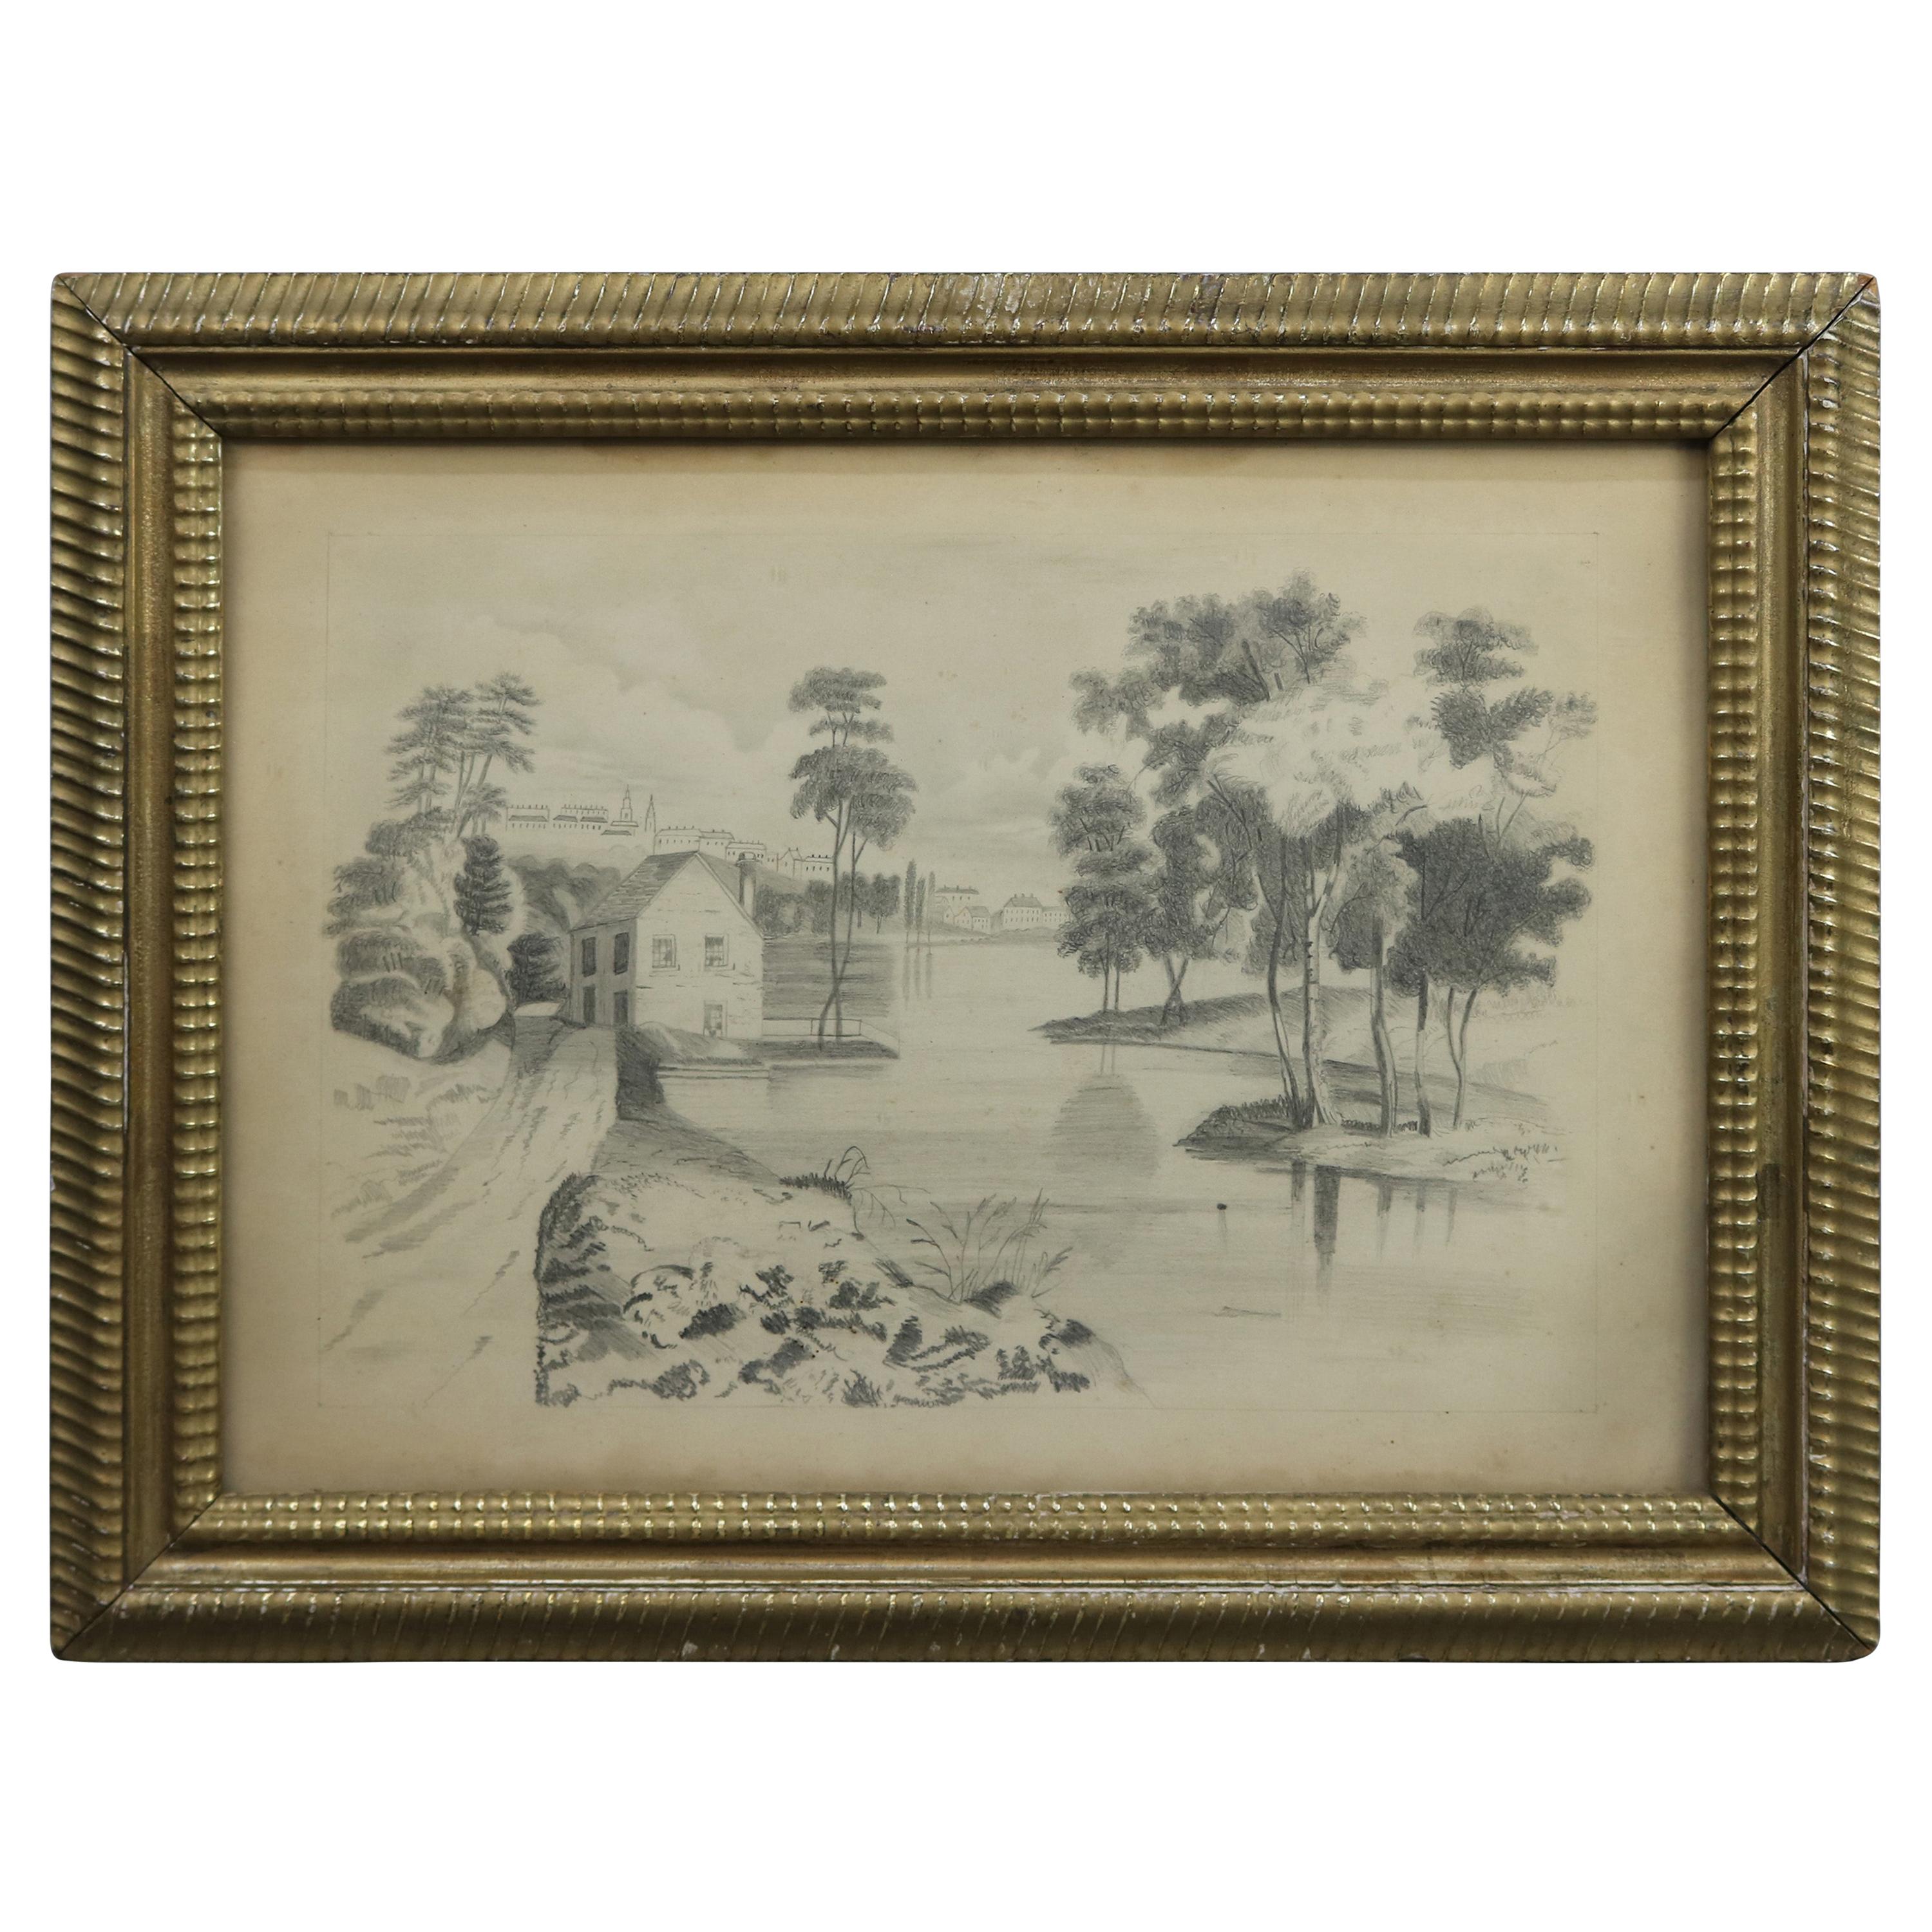 Early Landscape Pencil Drawing in Original Frame, c1880